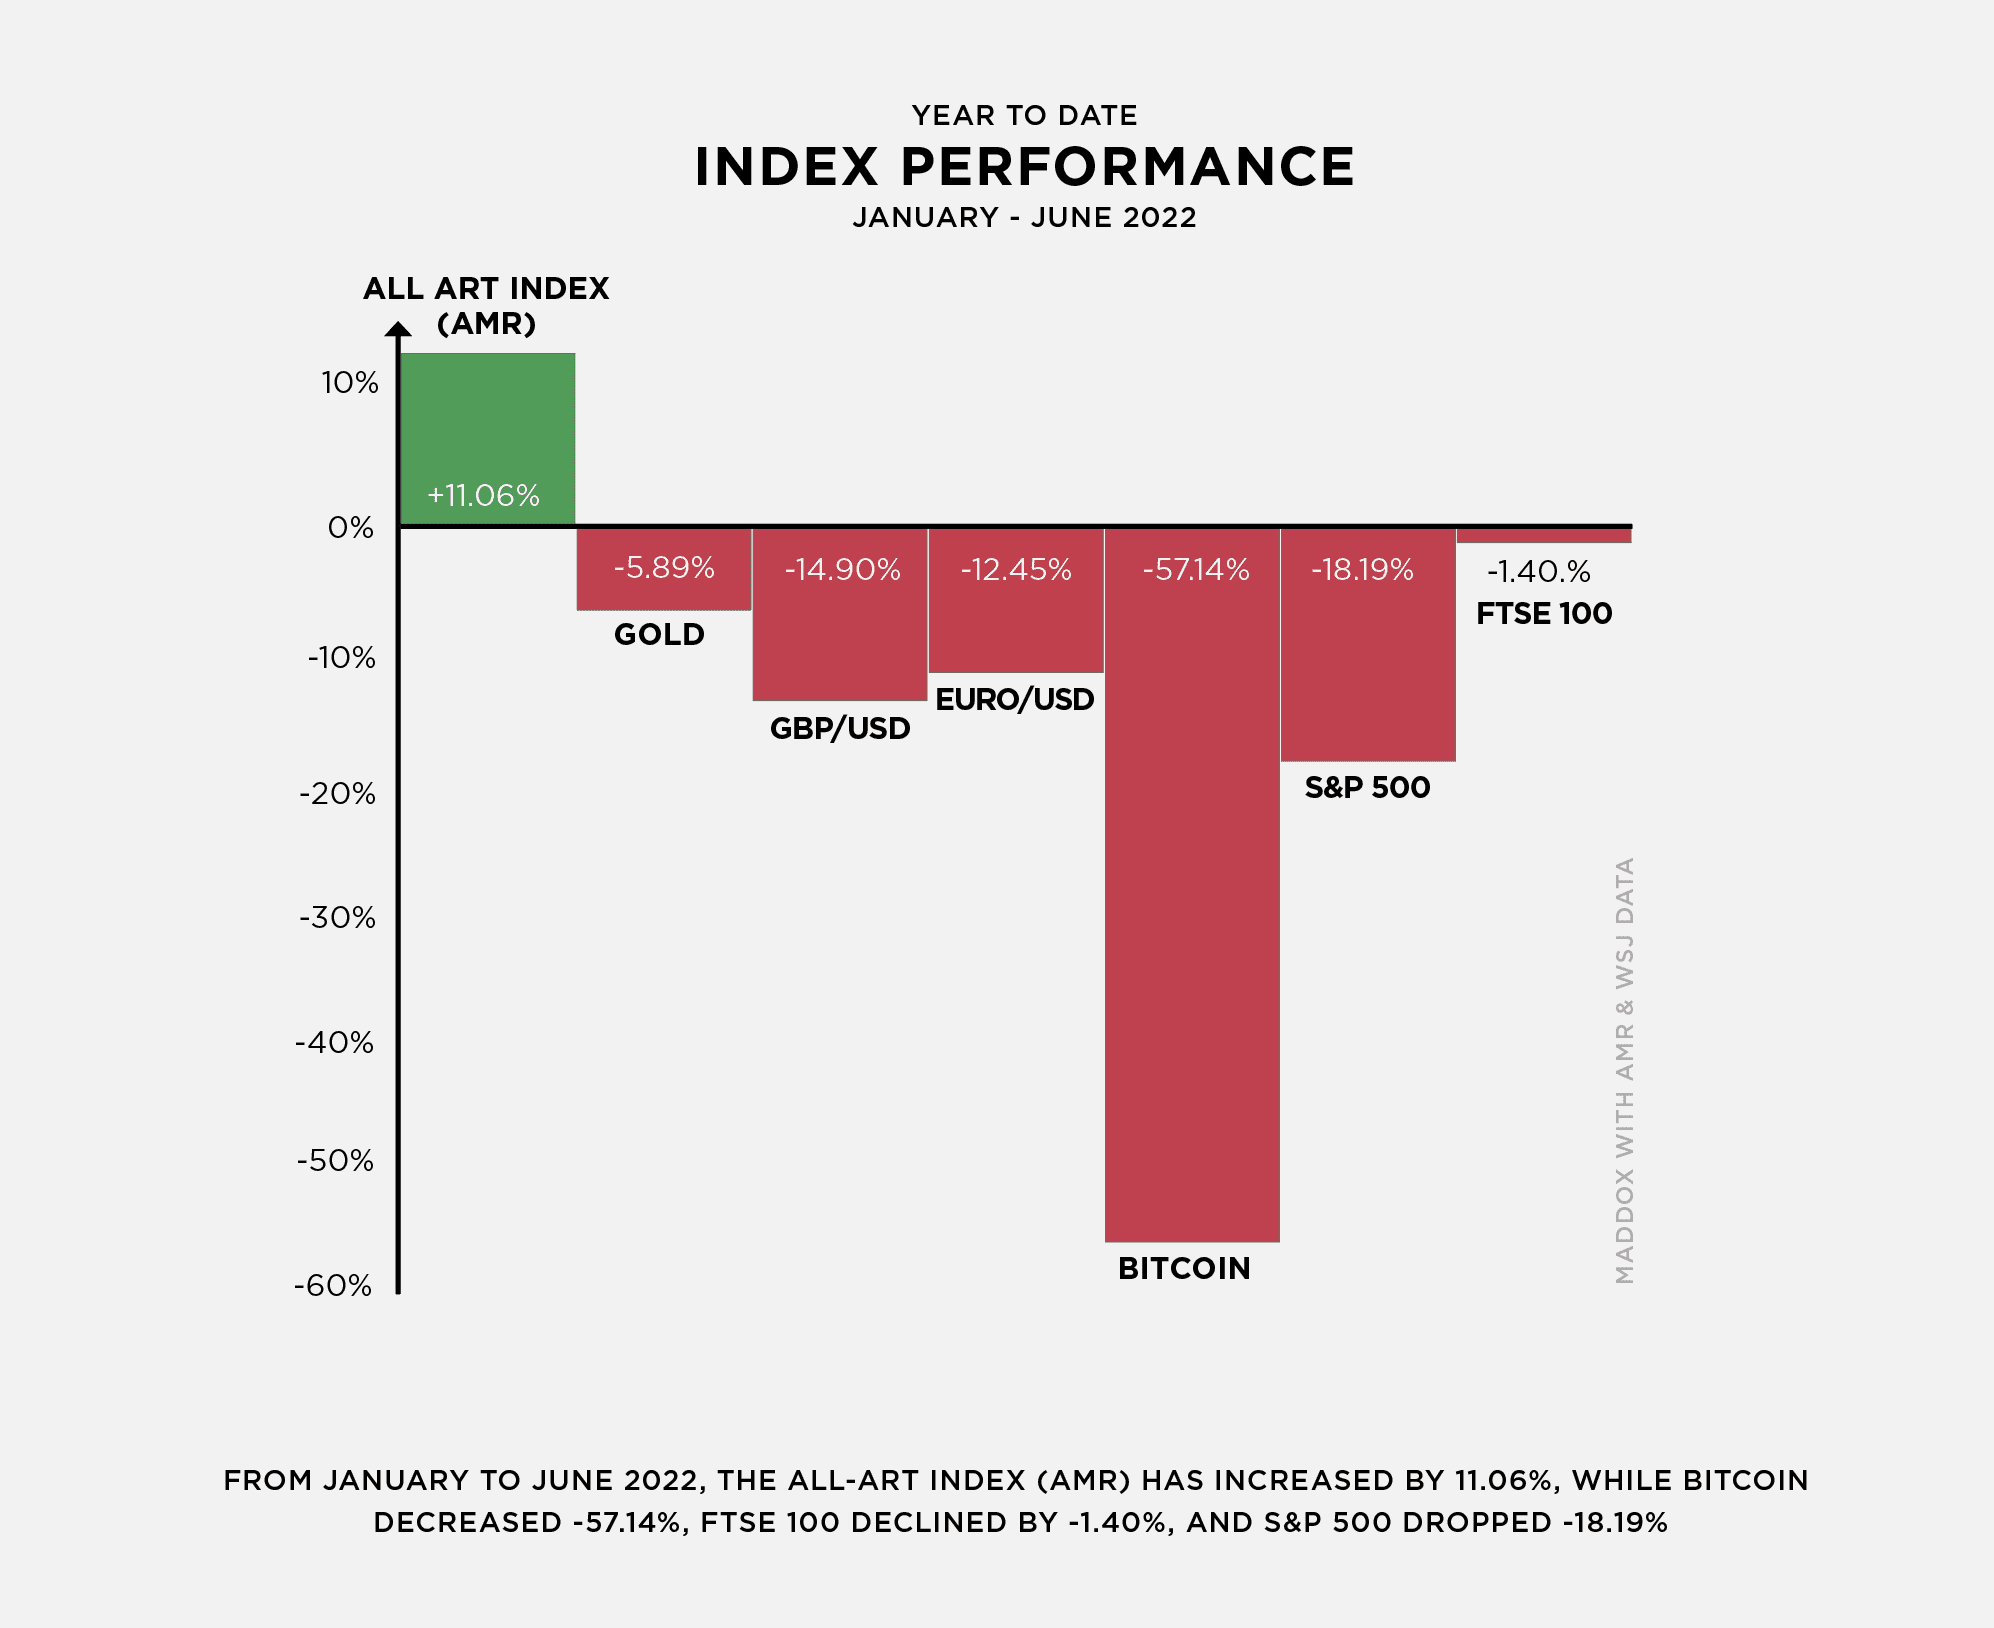 Index performance year to date